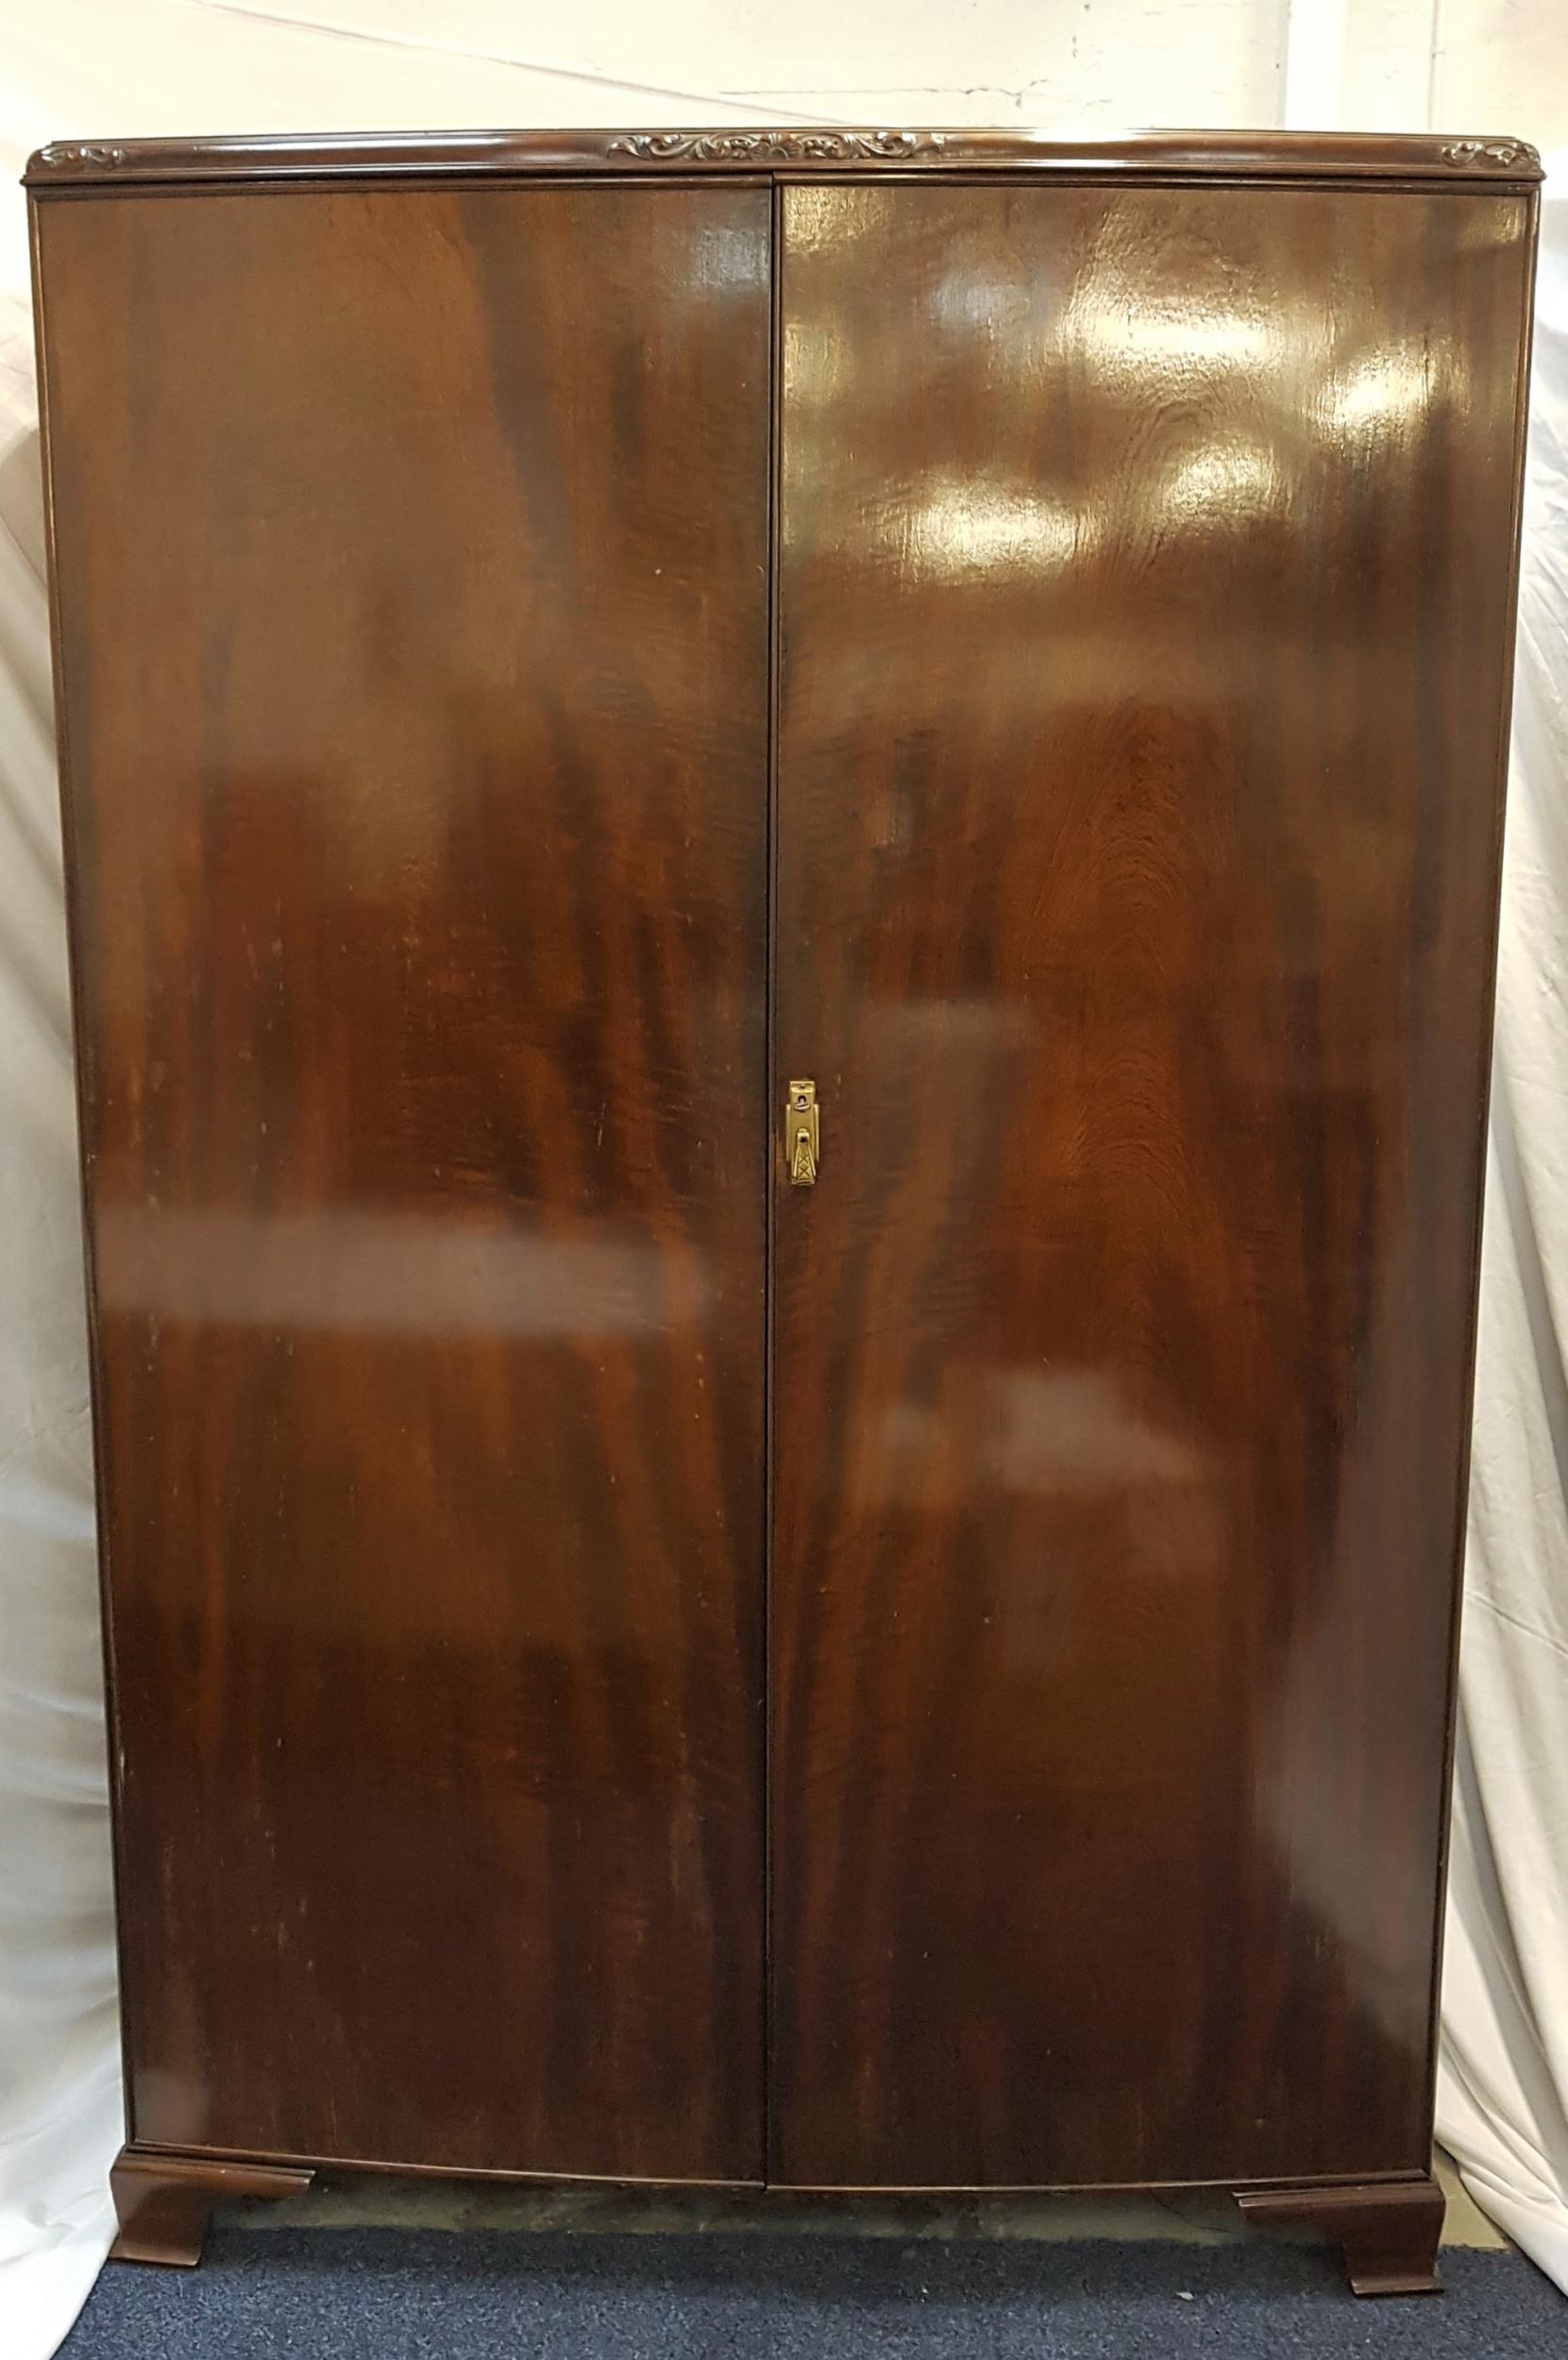 MAHOGANY TWO DOOR WARDROBE with an internal door mounted mirror, shelf and hanging rail, standing on